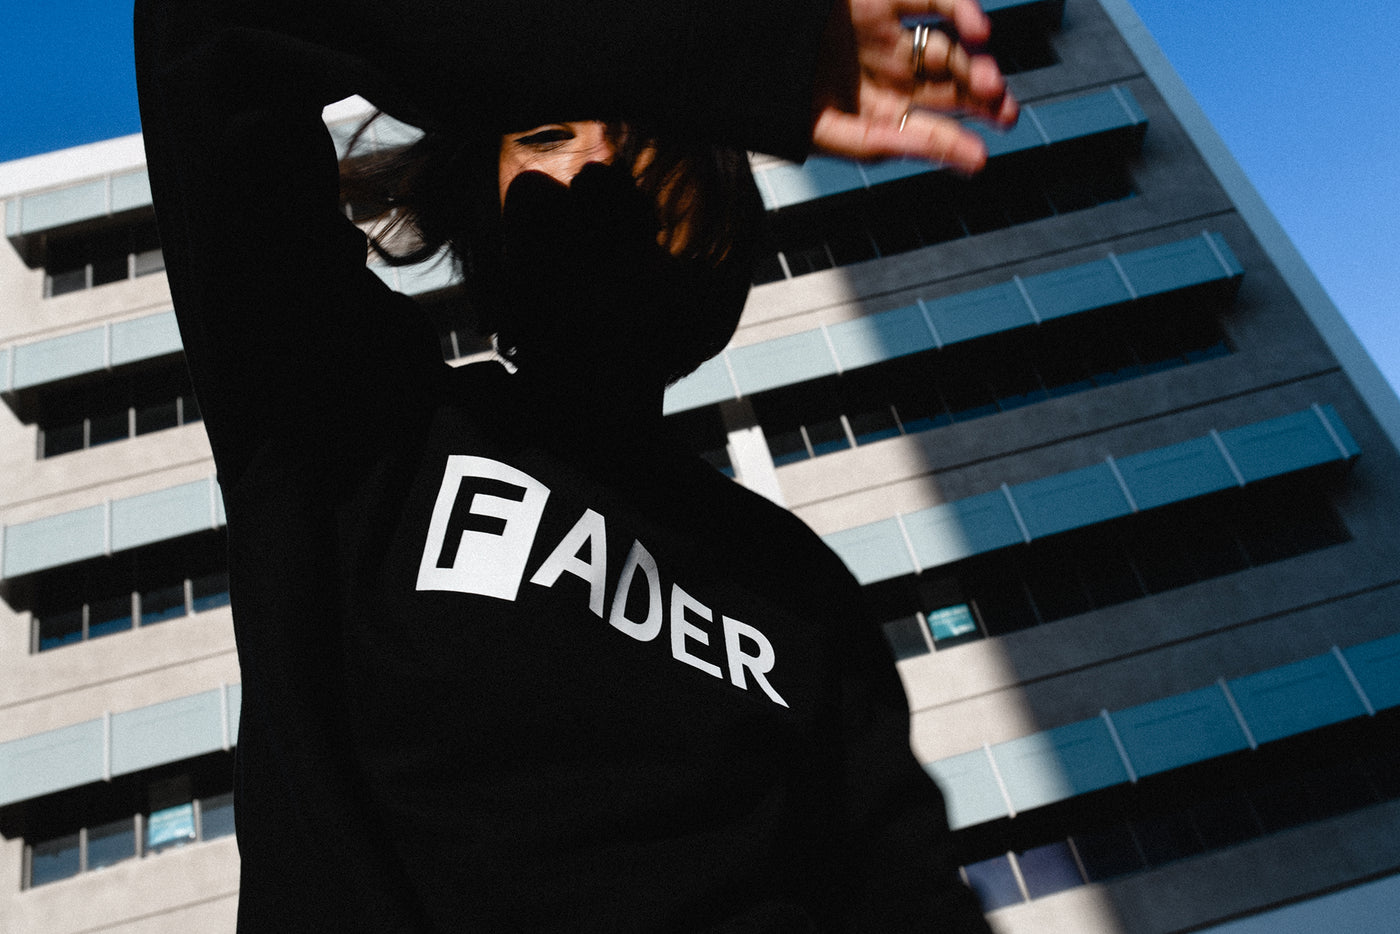 woman wearing black long sleeve with the FADER logo